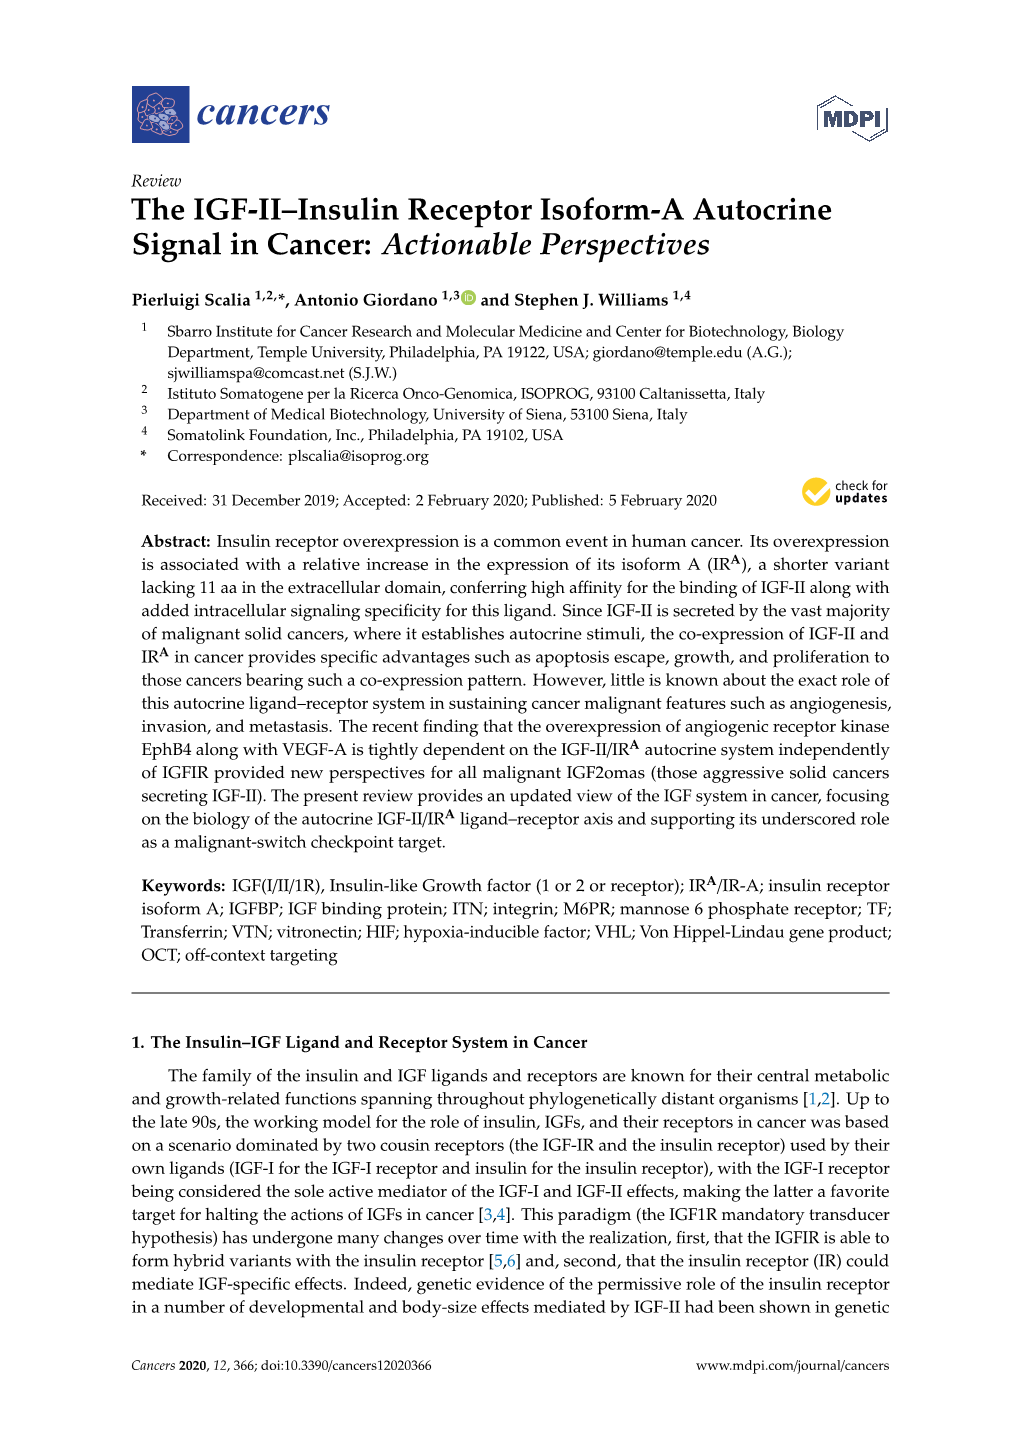 The IGF-II–Insulin Receptor Isoform-A Autocrine Signal in Cancer: Actionable Perspectives